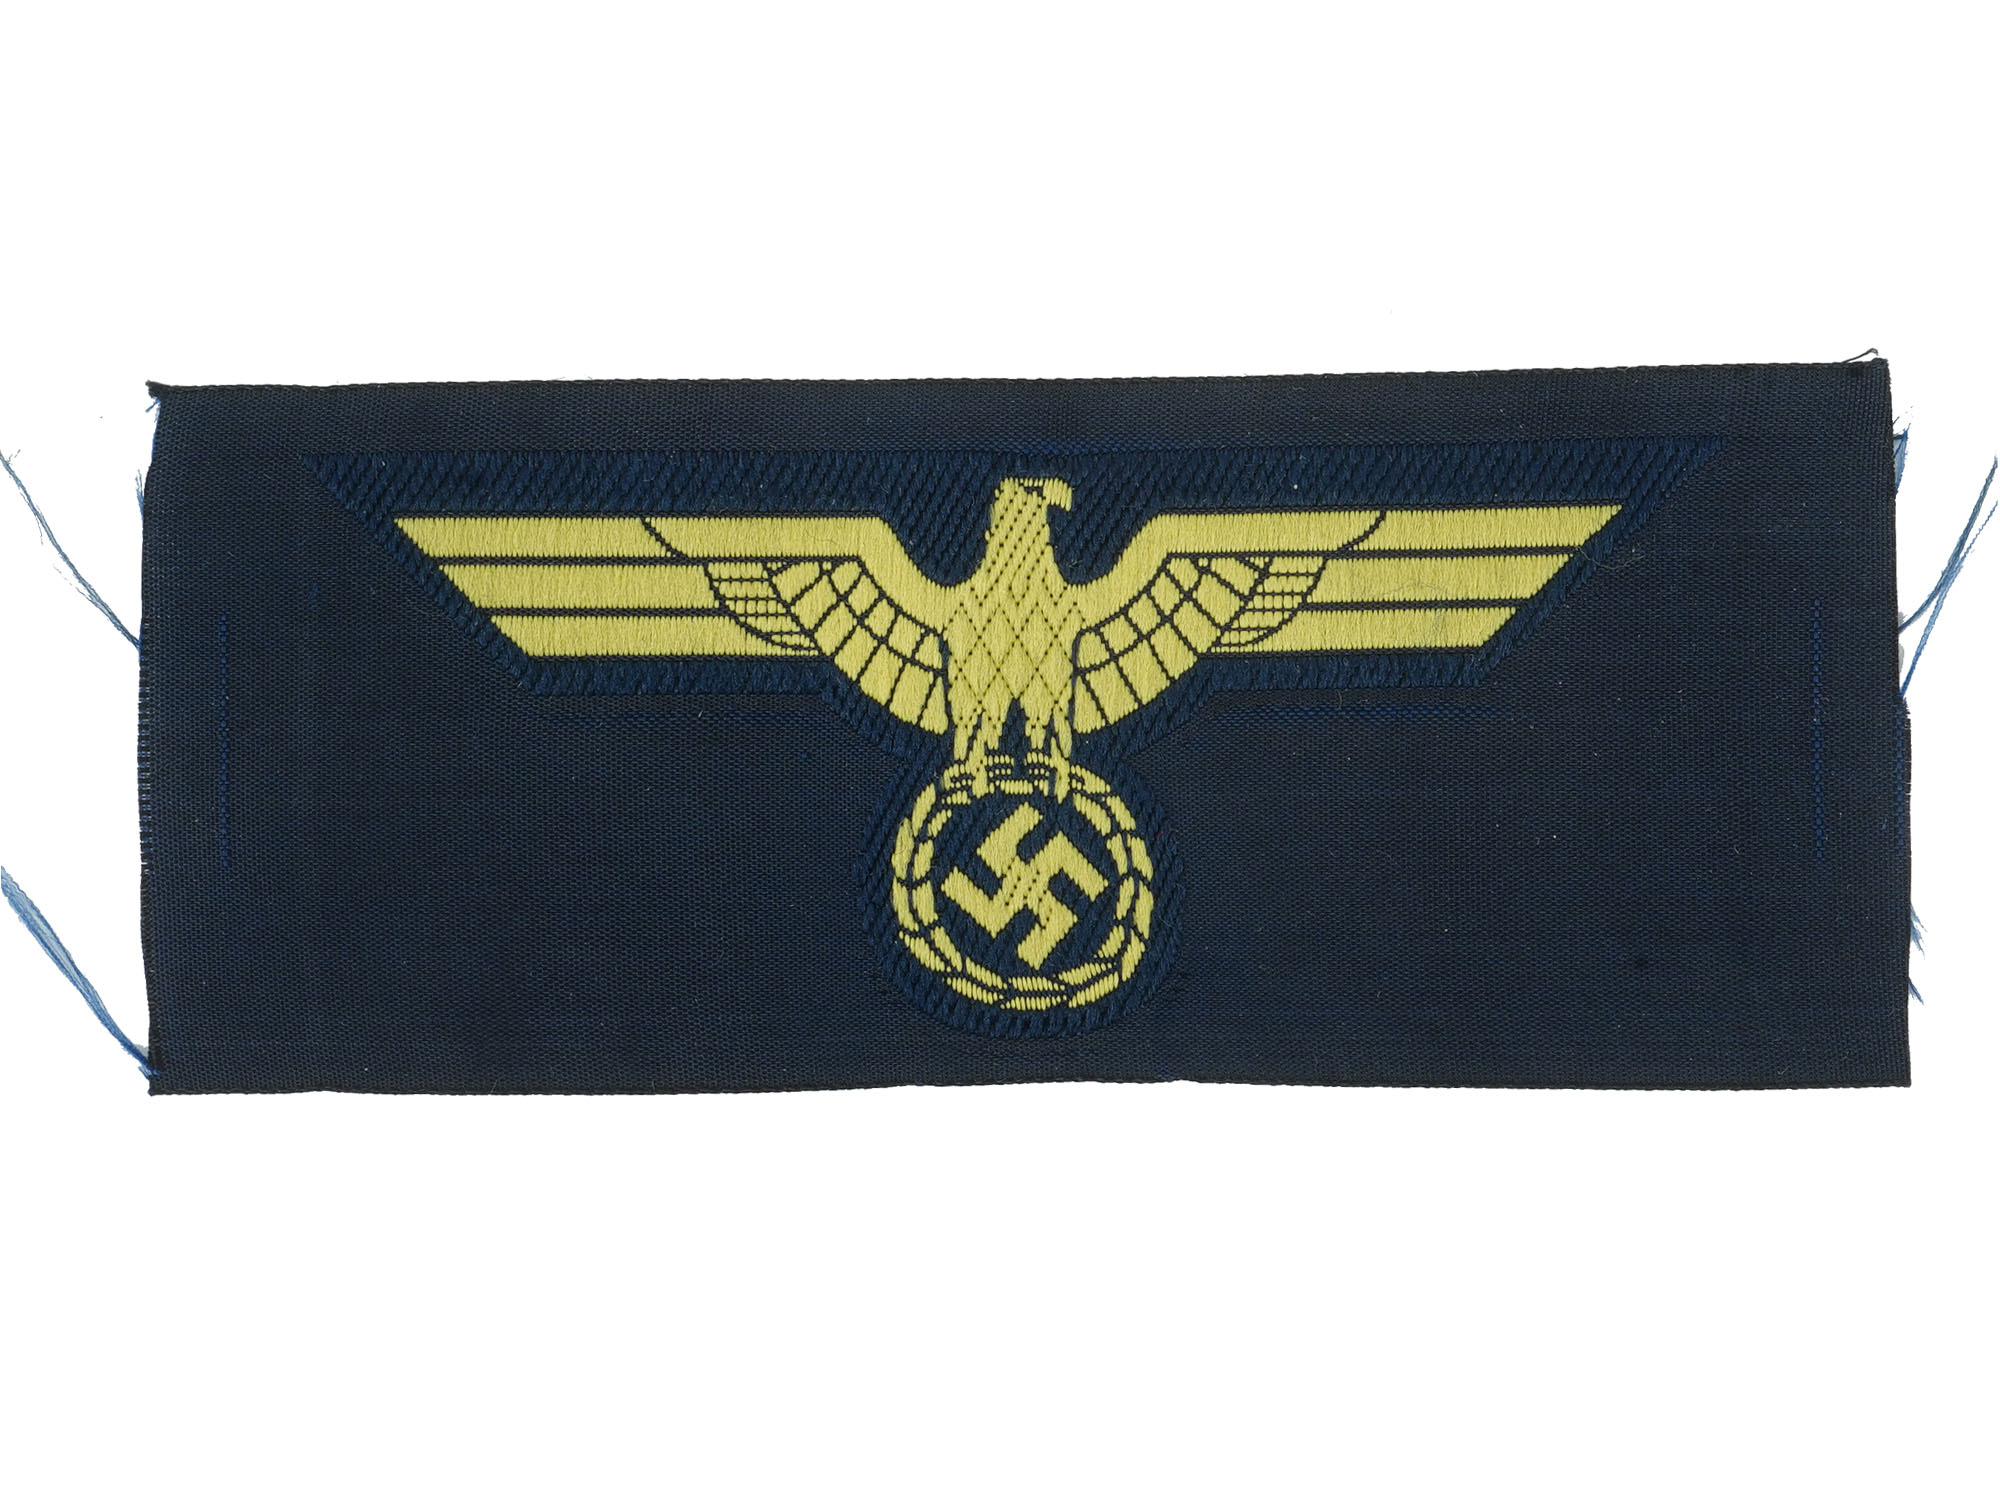 WWII GERMAN NAZI THIRD REICH FABRIC UNIFORM PATCHES PIC-4